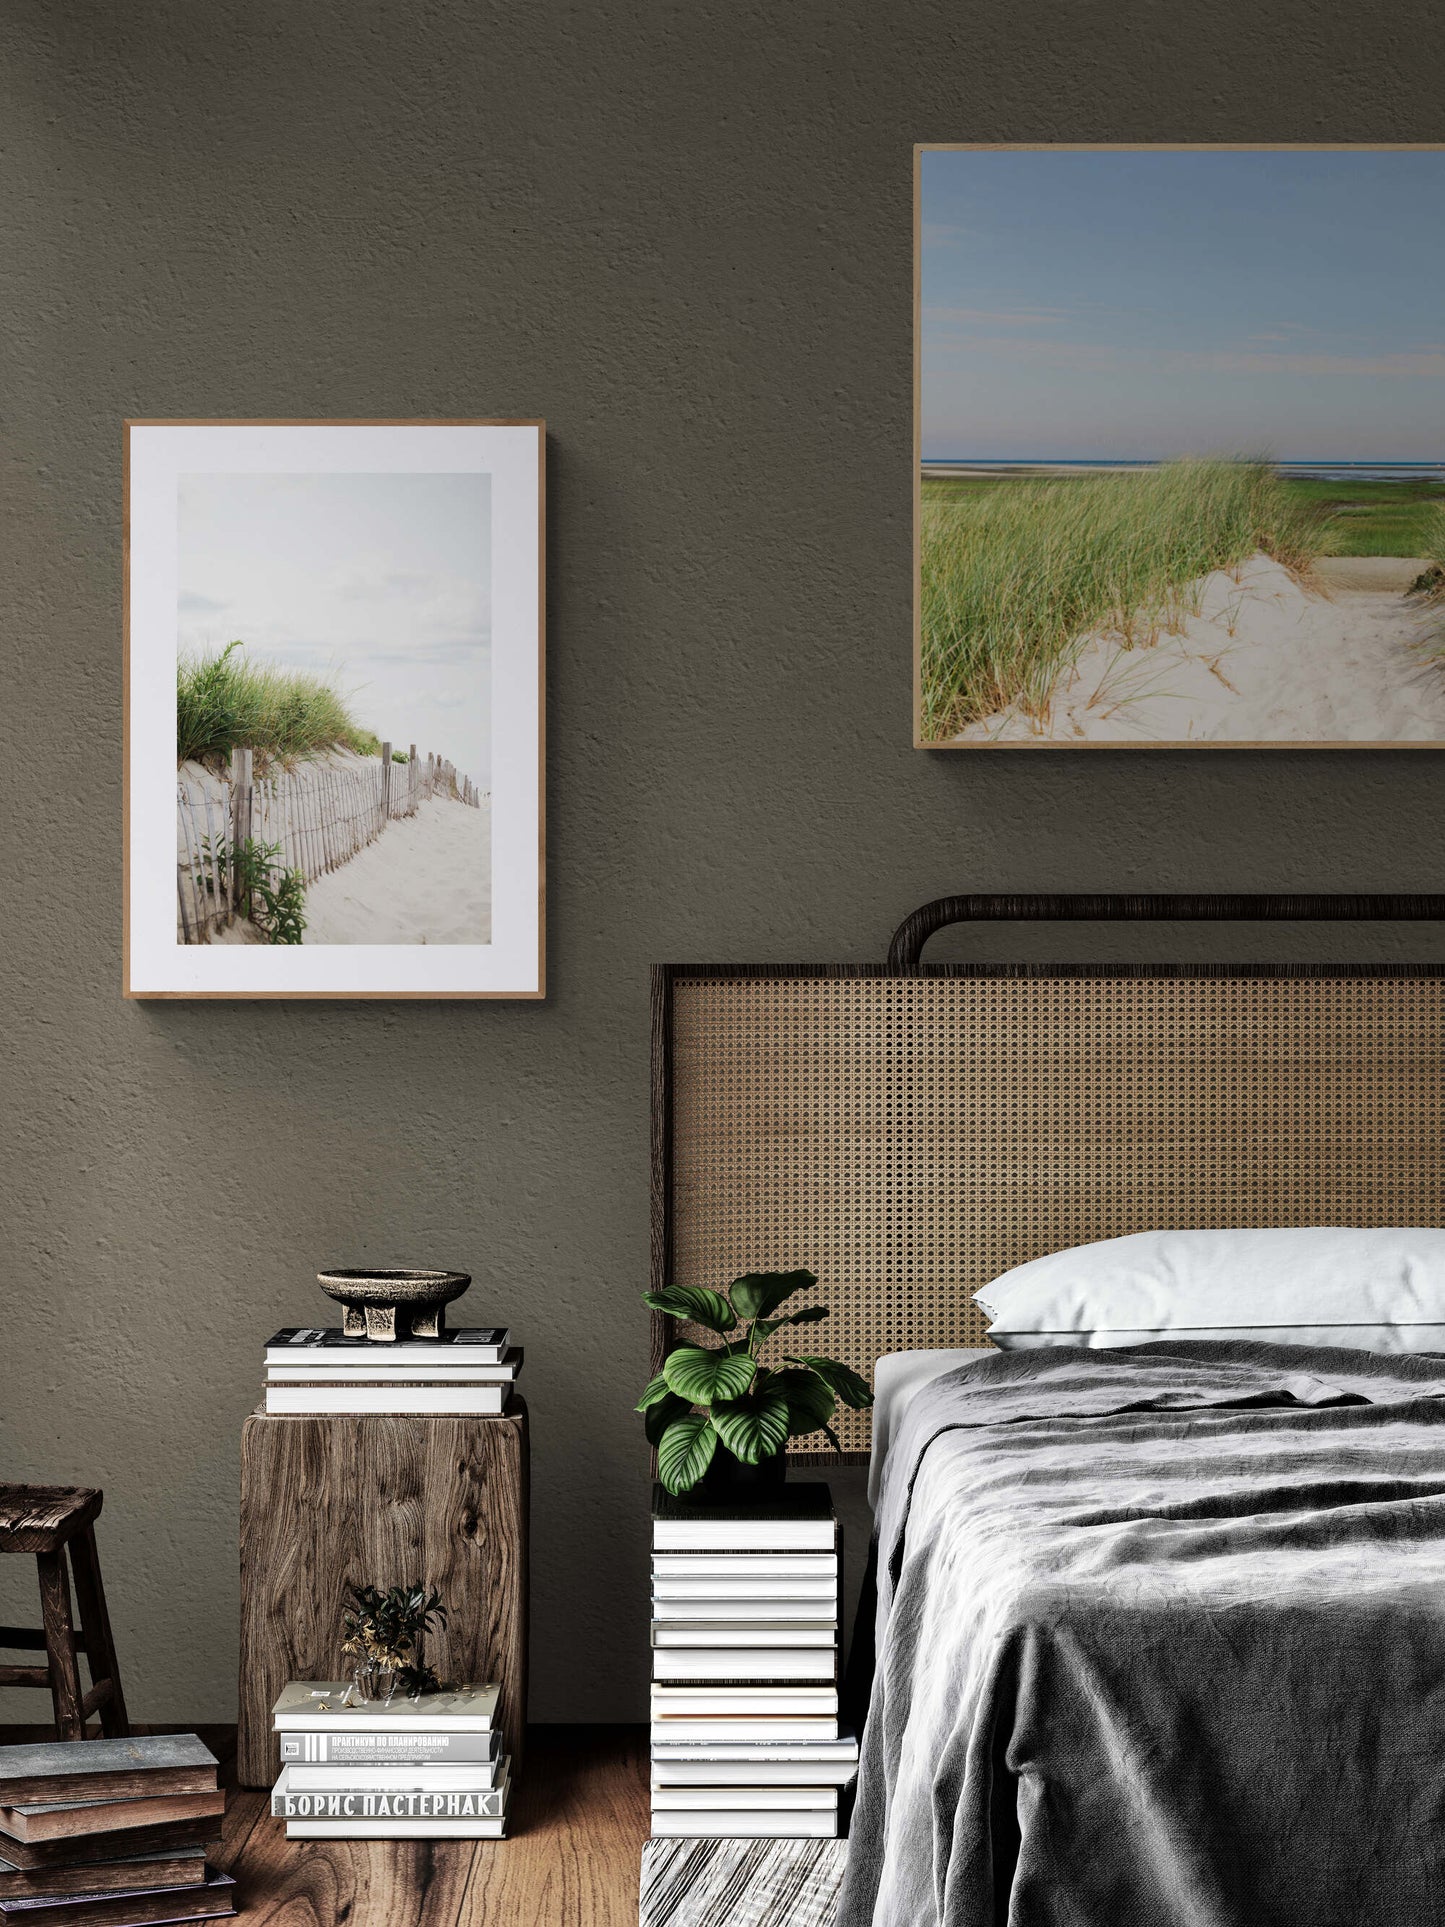 Cape Cod Photograph as Wall Art Print in a Bedroom